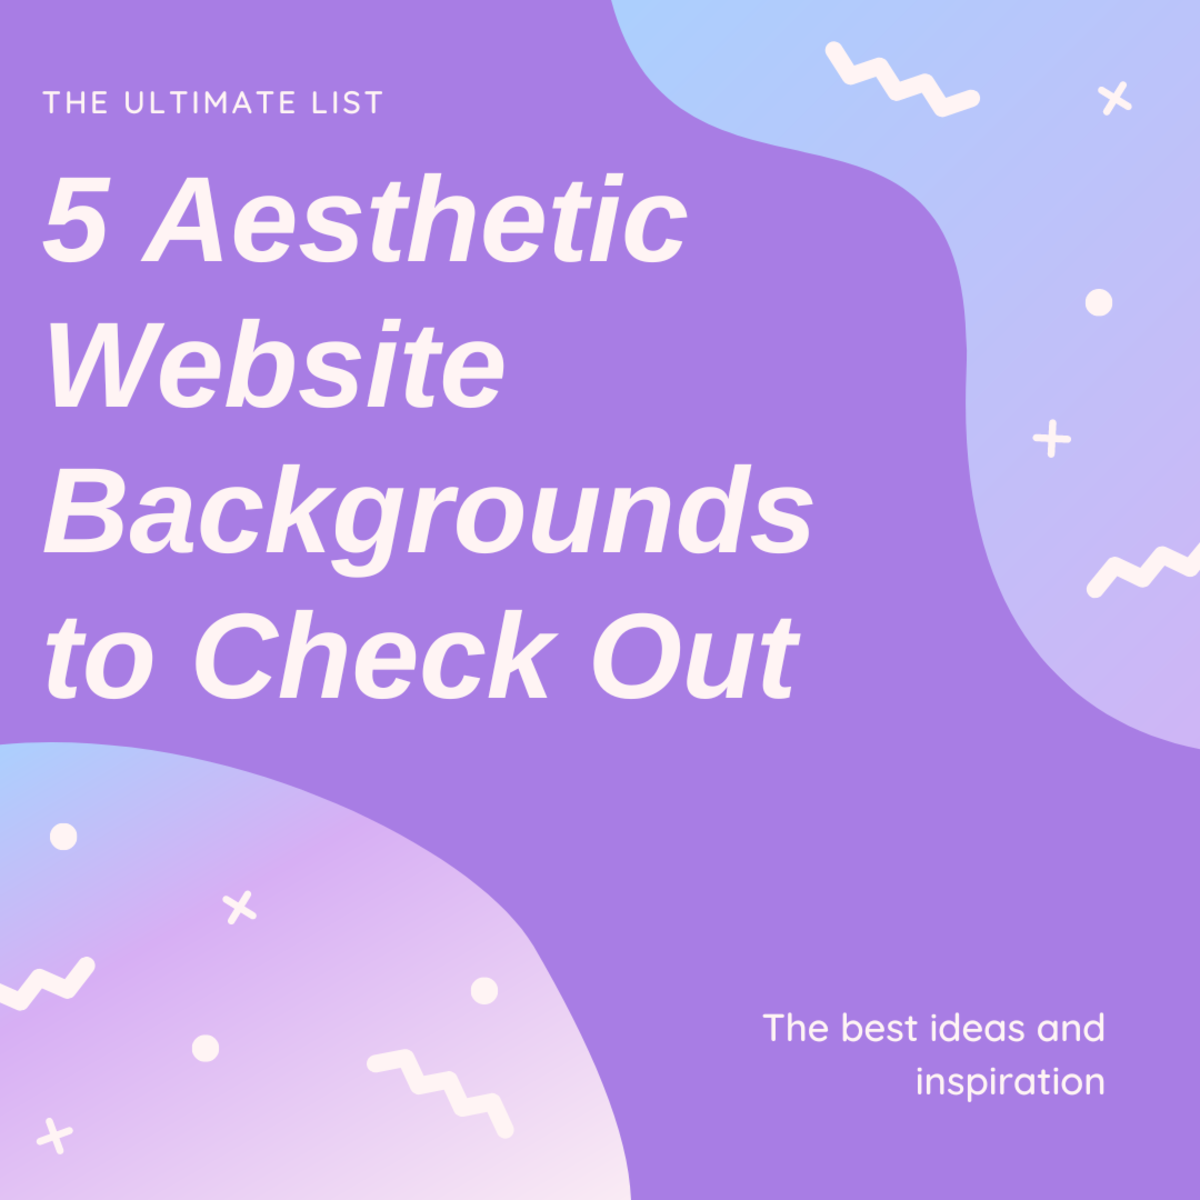 5 Best Aesthetic Website Backgrounds to Check Out: The Ultimate List